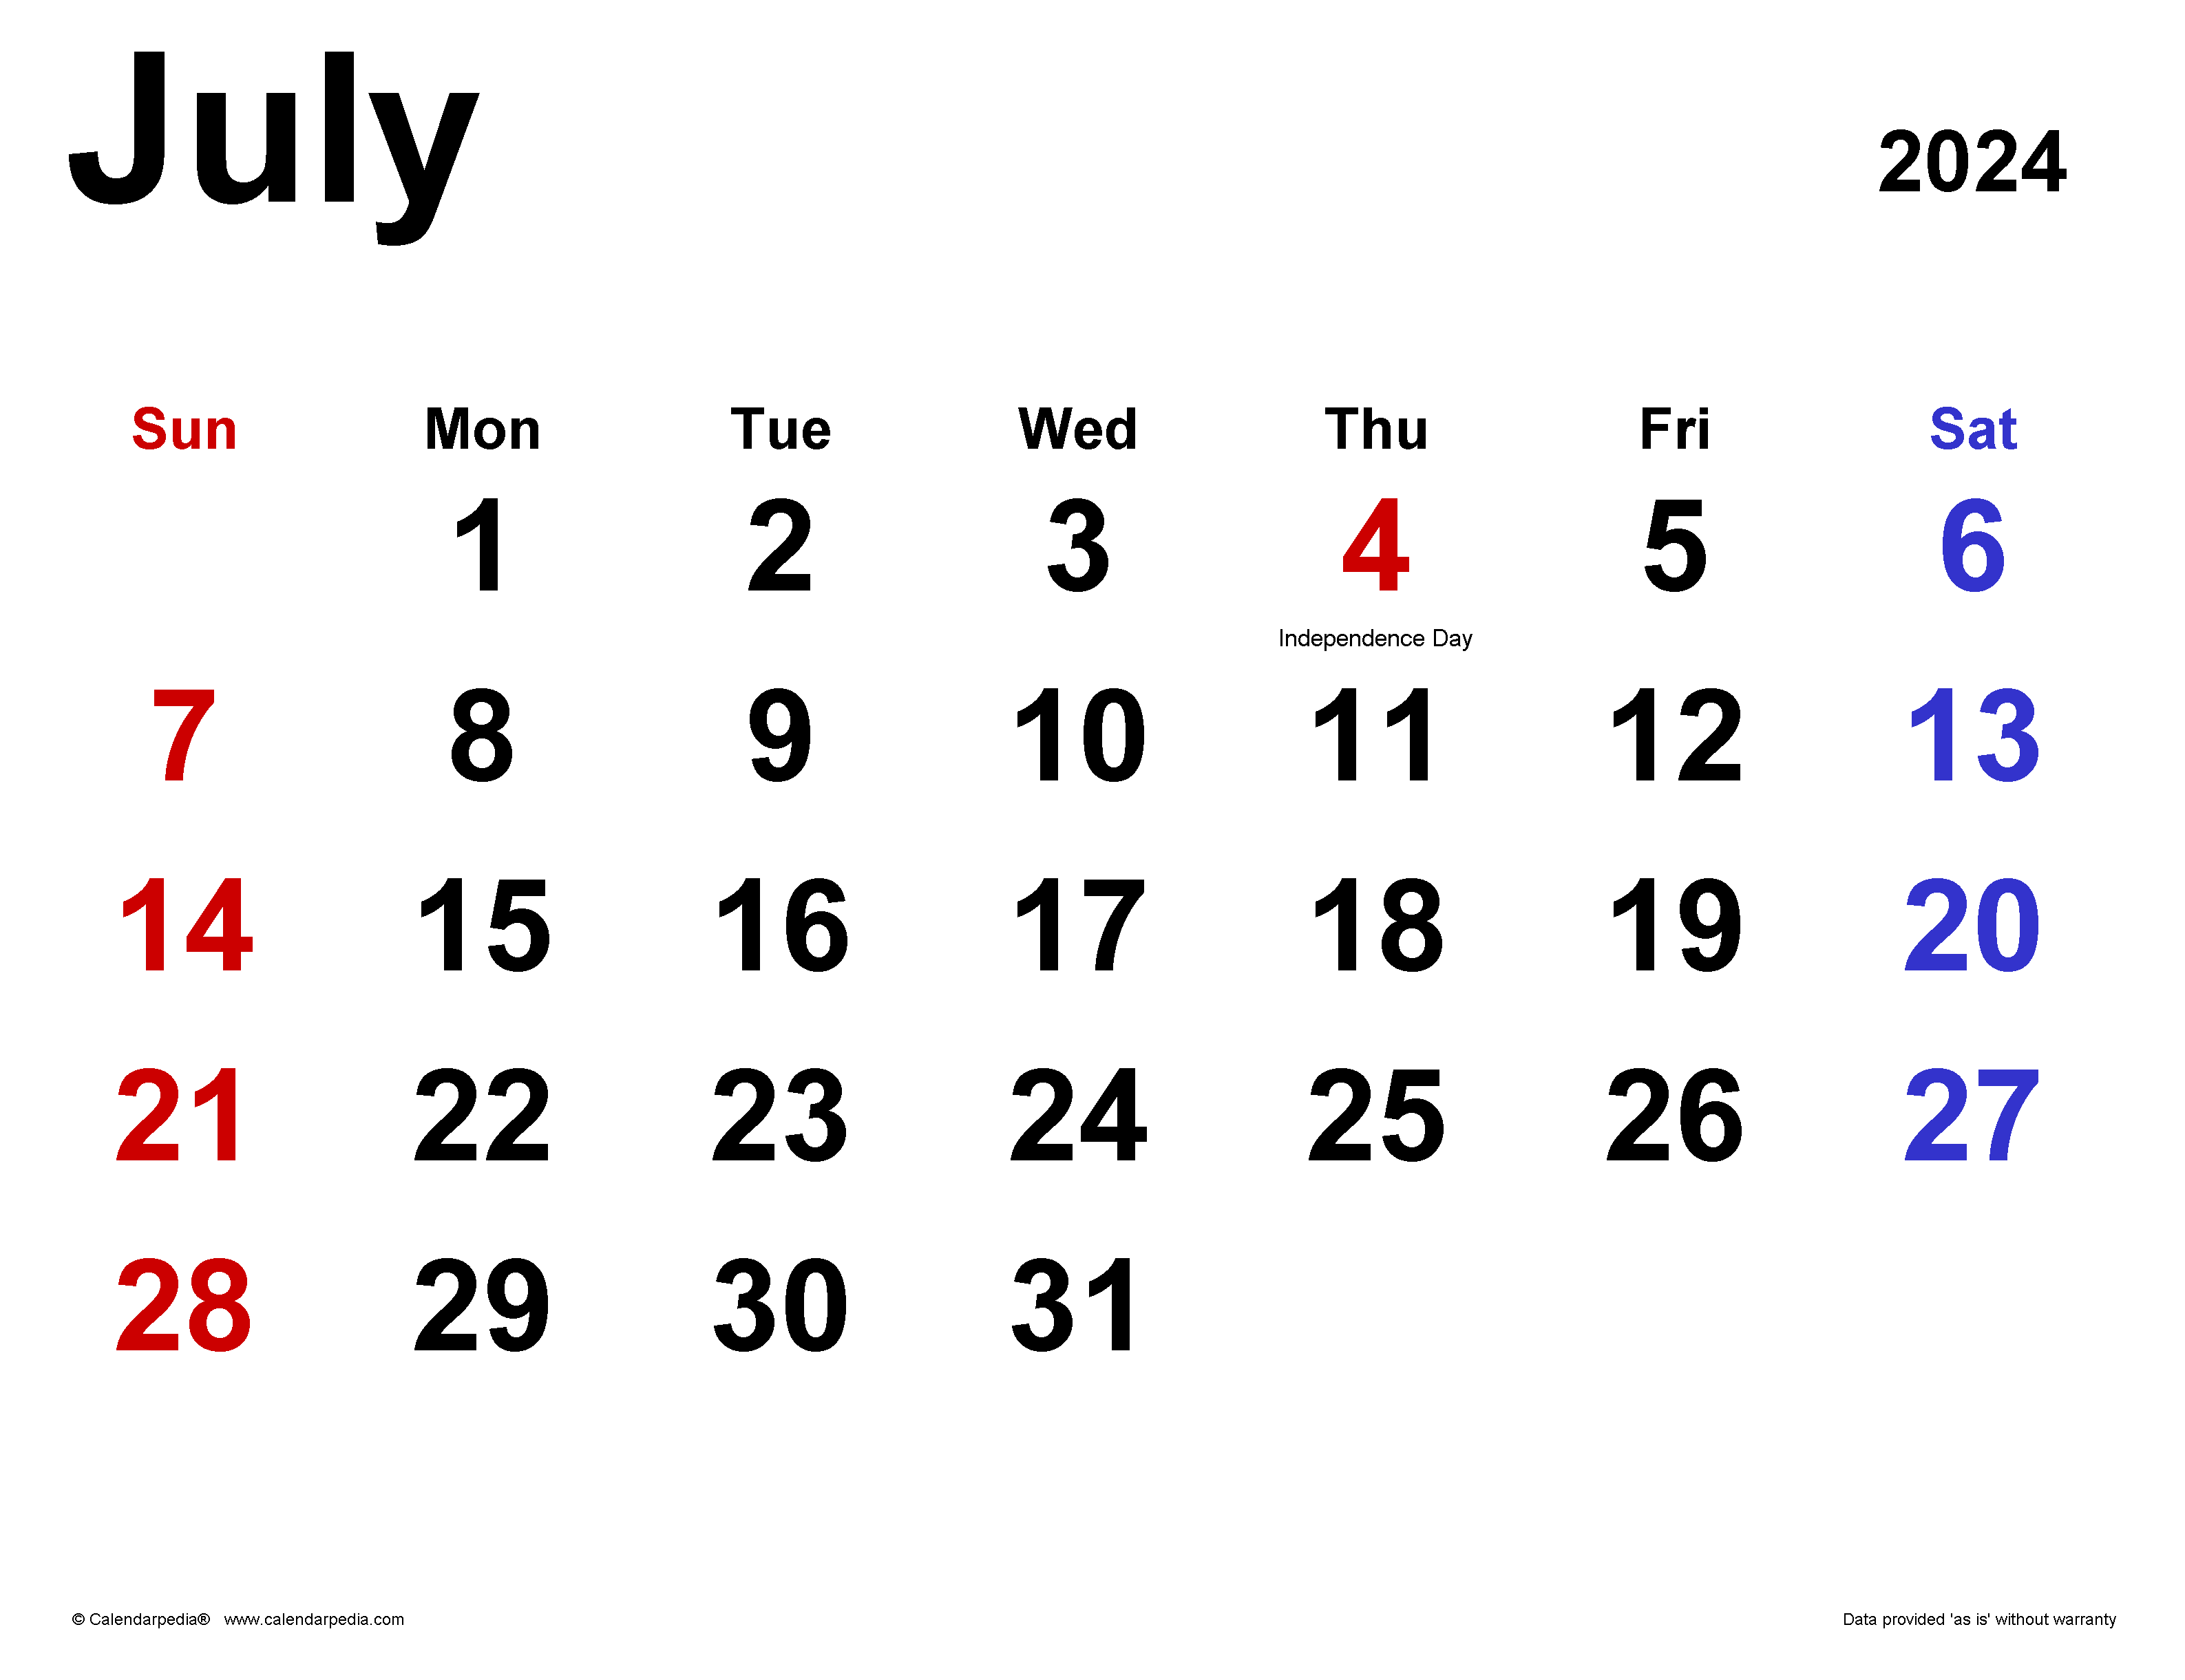 July 2024 Calendar | Templates For Word, Excel And Pdf with regard to 2 Month Desk Calendar Starting July 2024